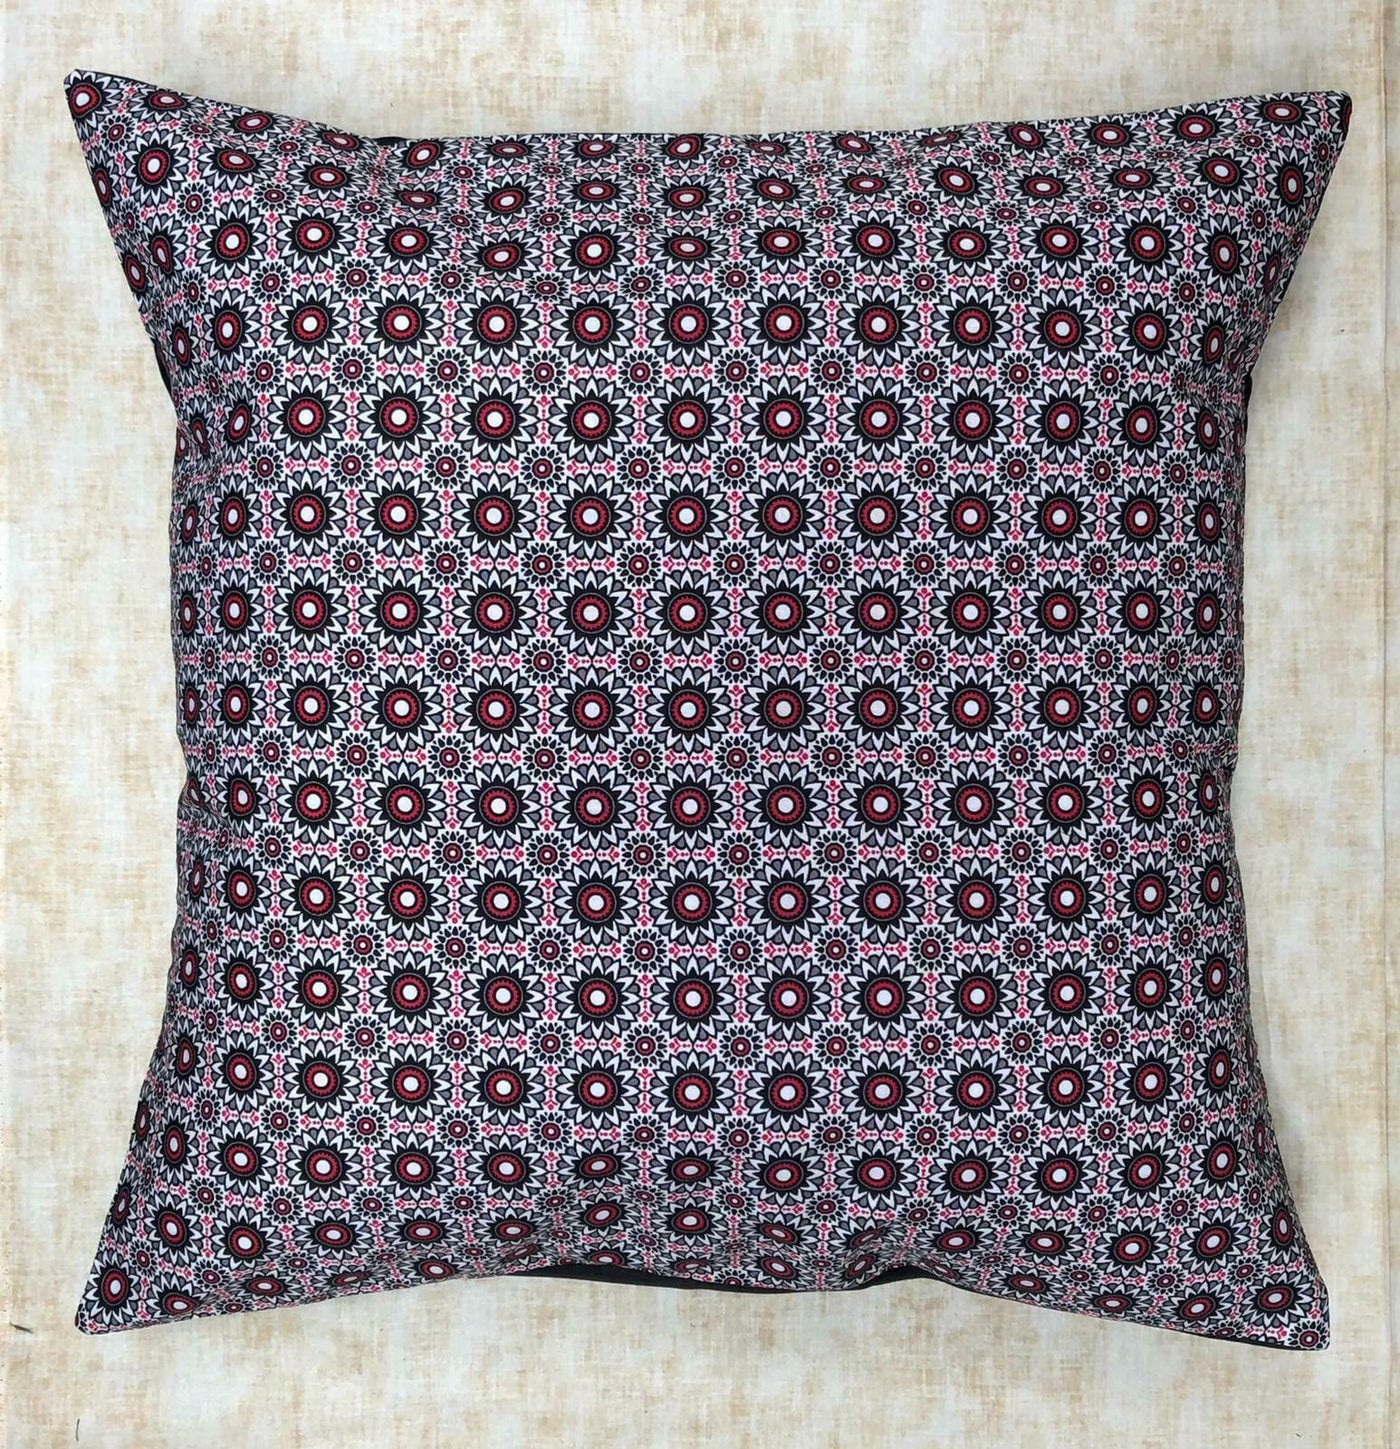 Balinese Repeating Flower Cushion Cover - David Textiles - 100% Cotton Fabric